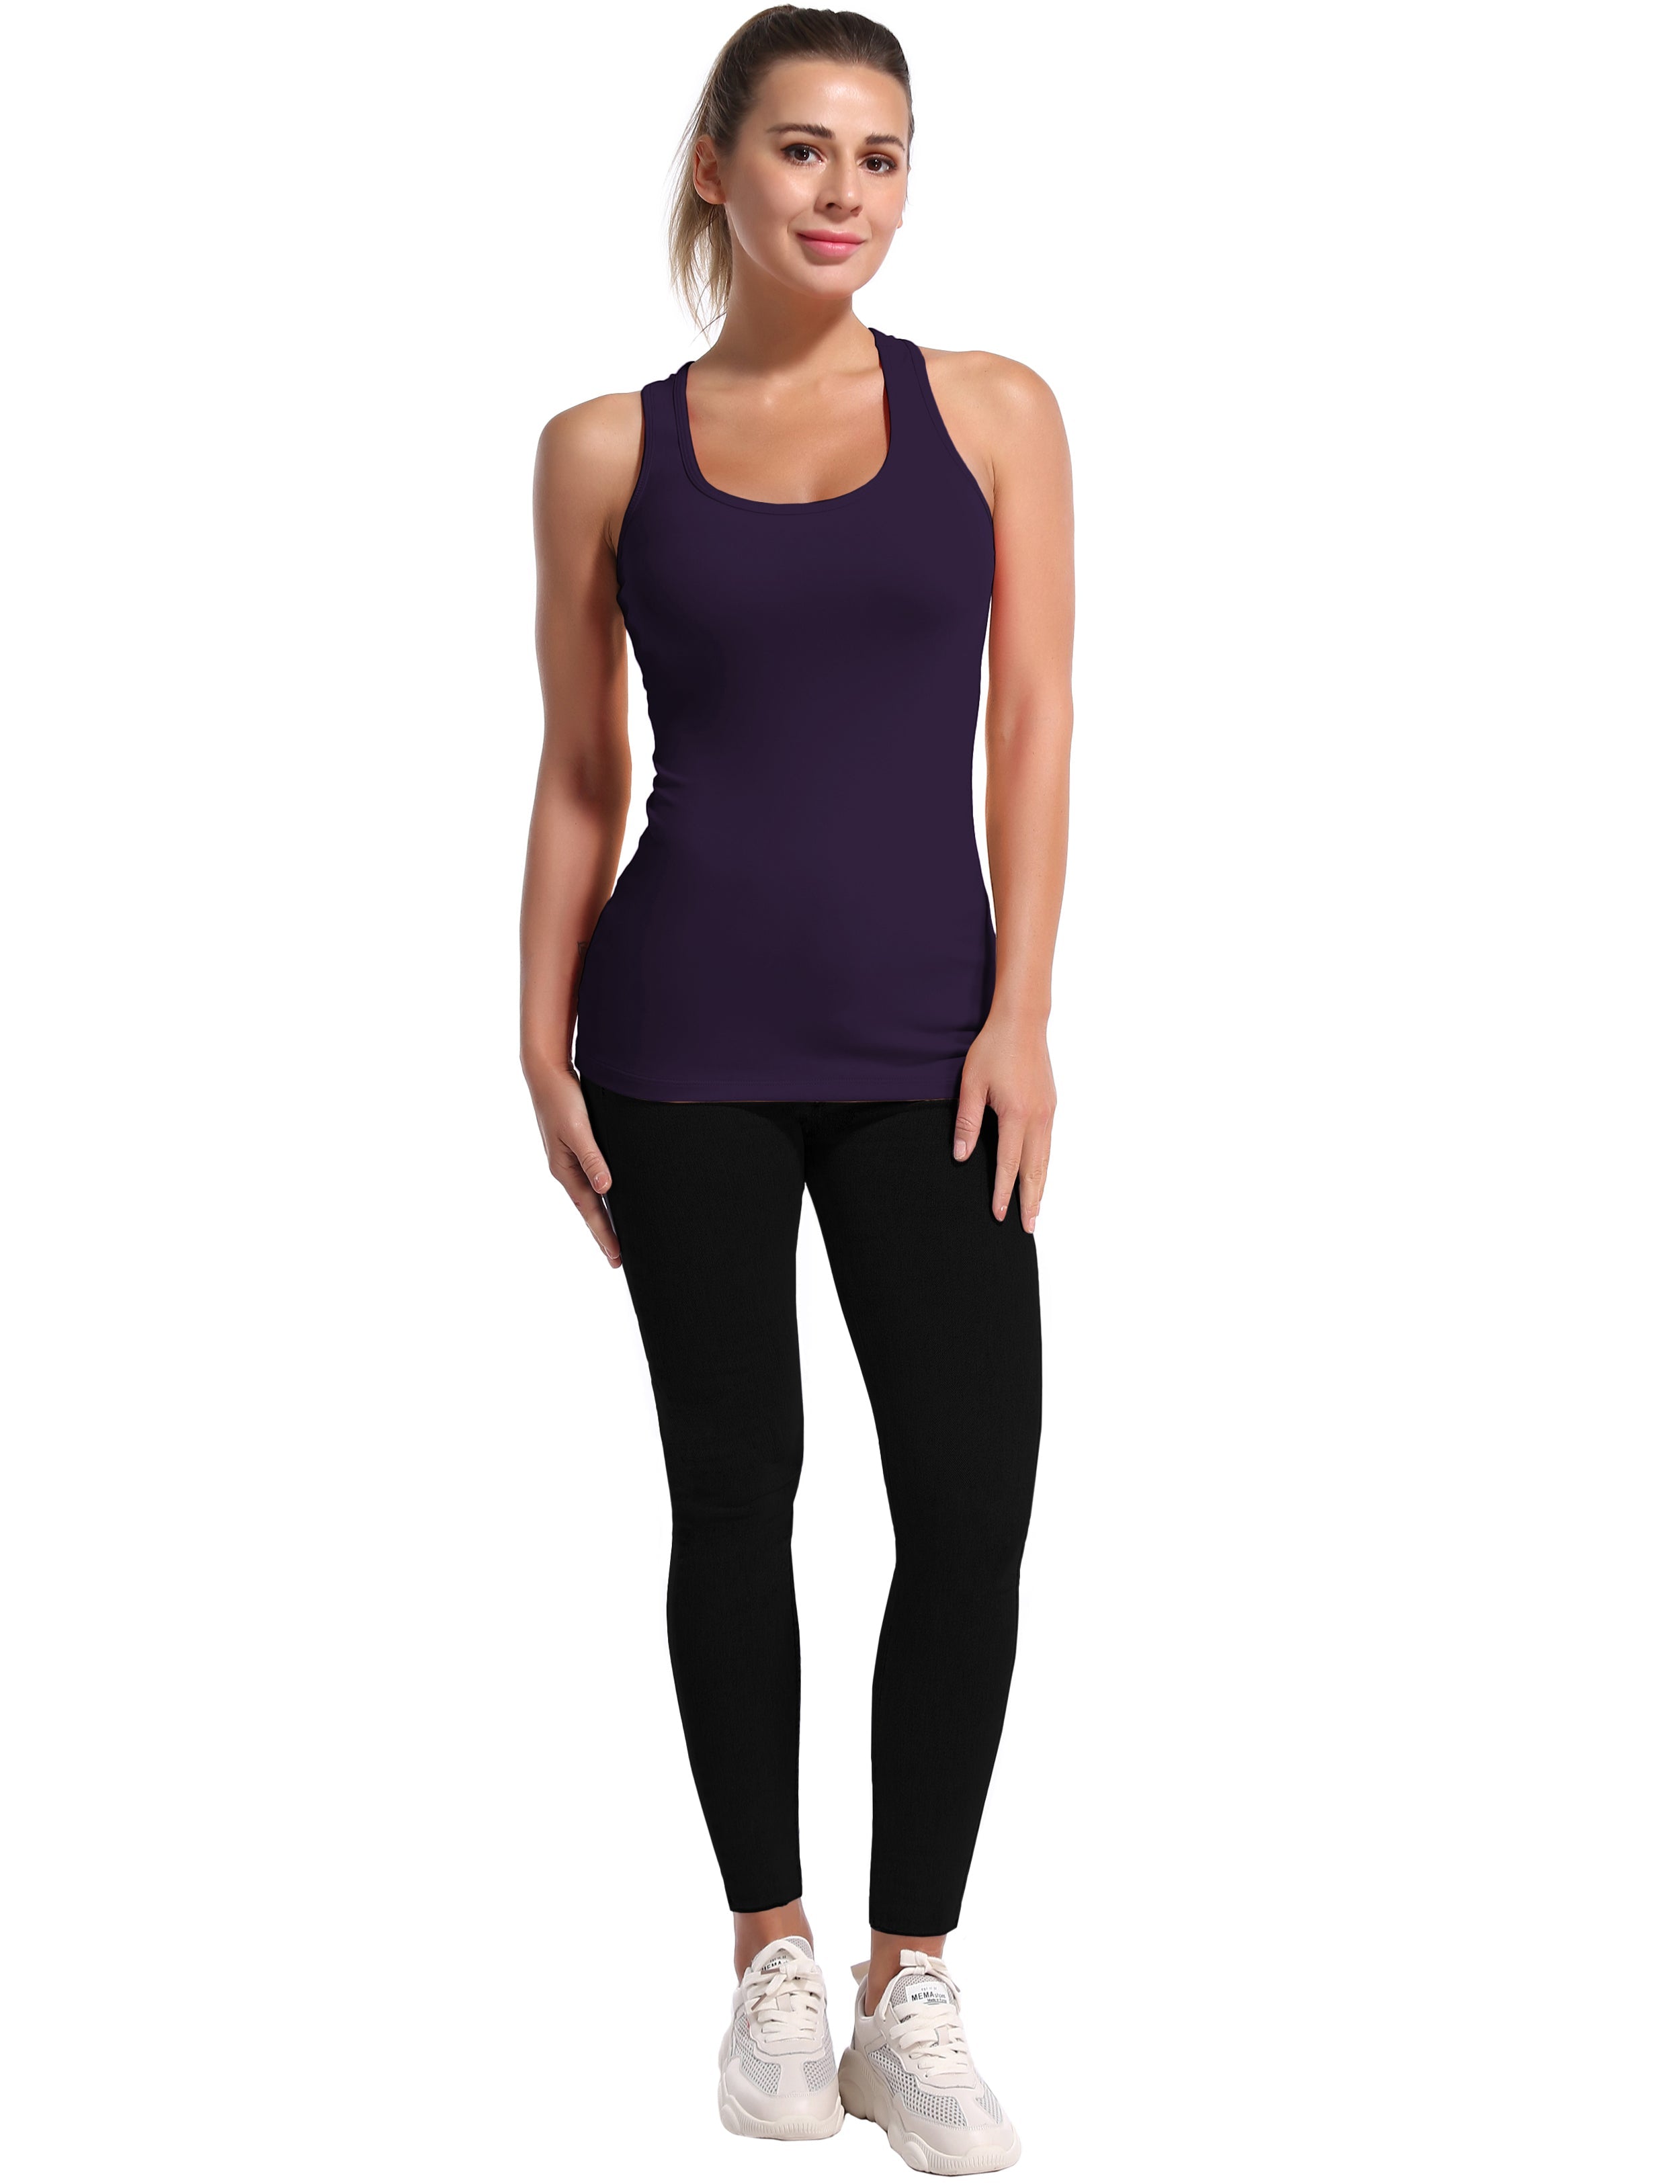 Racerback Athletic Tank Tops midnightblue 92%Nylon/8%Spandex(Cotton Soft) Designed for Golf Tight Fit So buttery soft, it feels weightless Sweat-wicking Four-way stretch Breathable Contours your body Sits below the waistband for moderate, everyday coverage